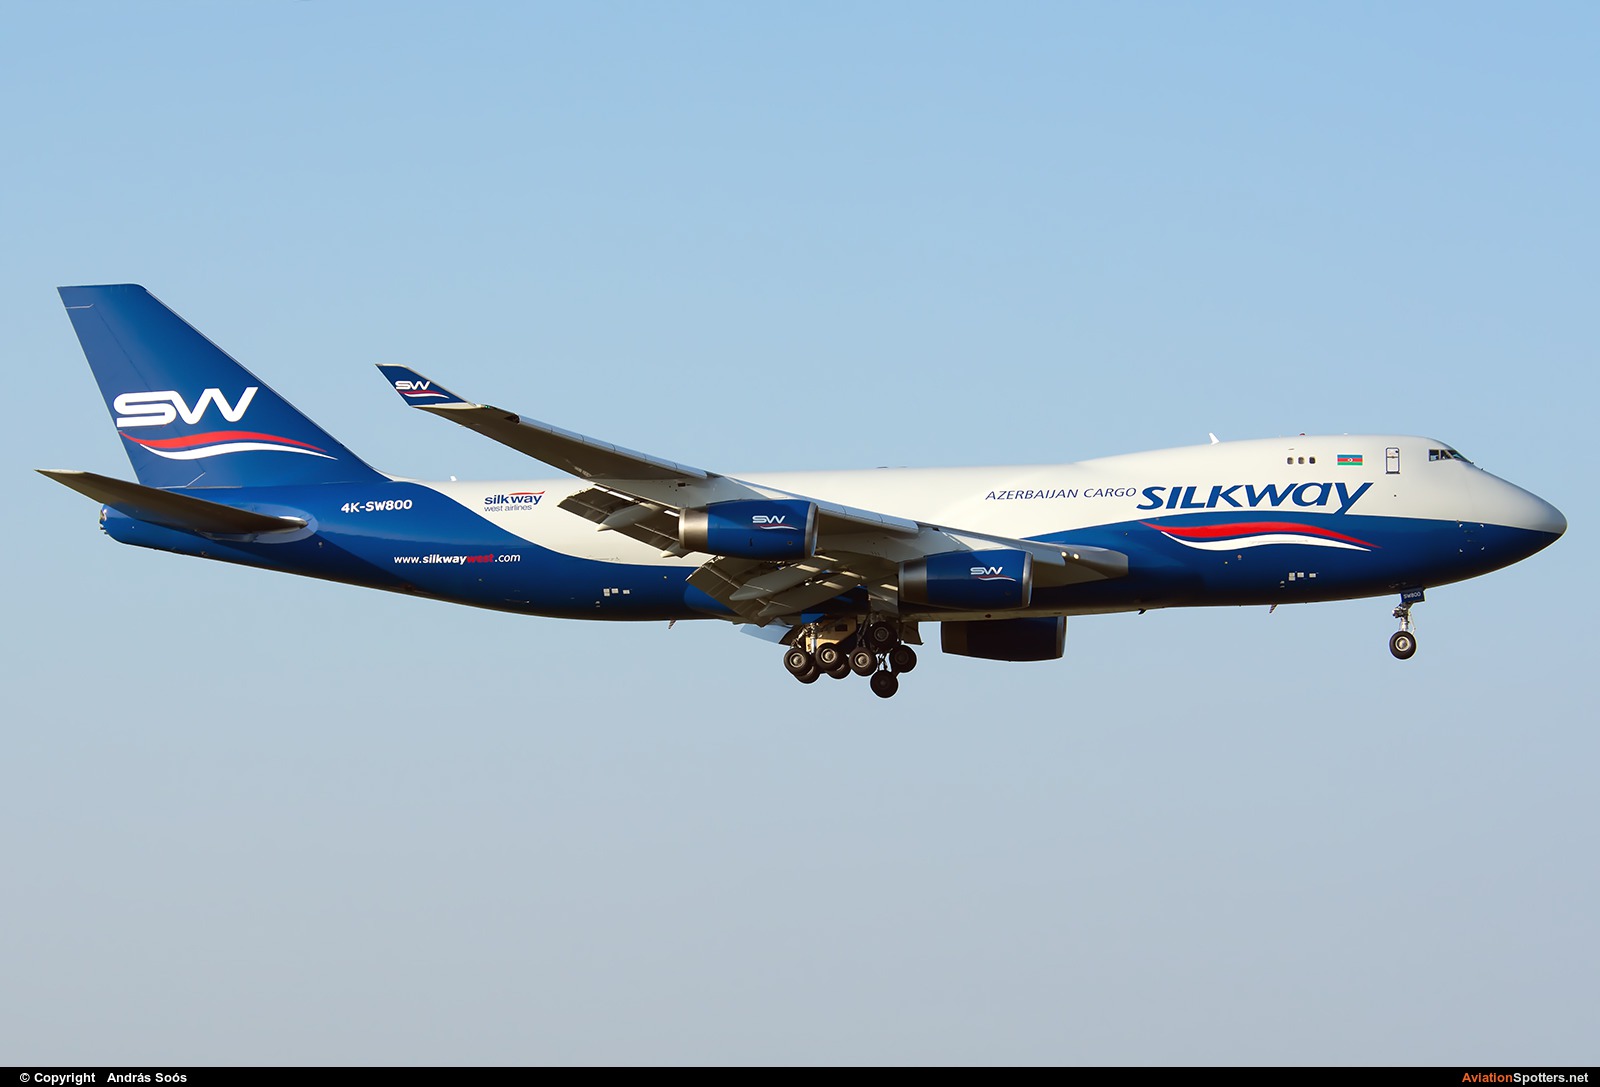 Silk Way Airlines  -  747-400F  (4K-SW800) By András Soós (sas1965)